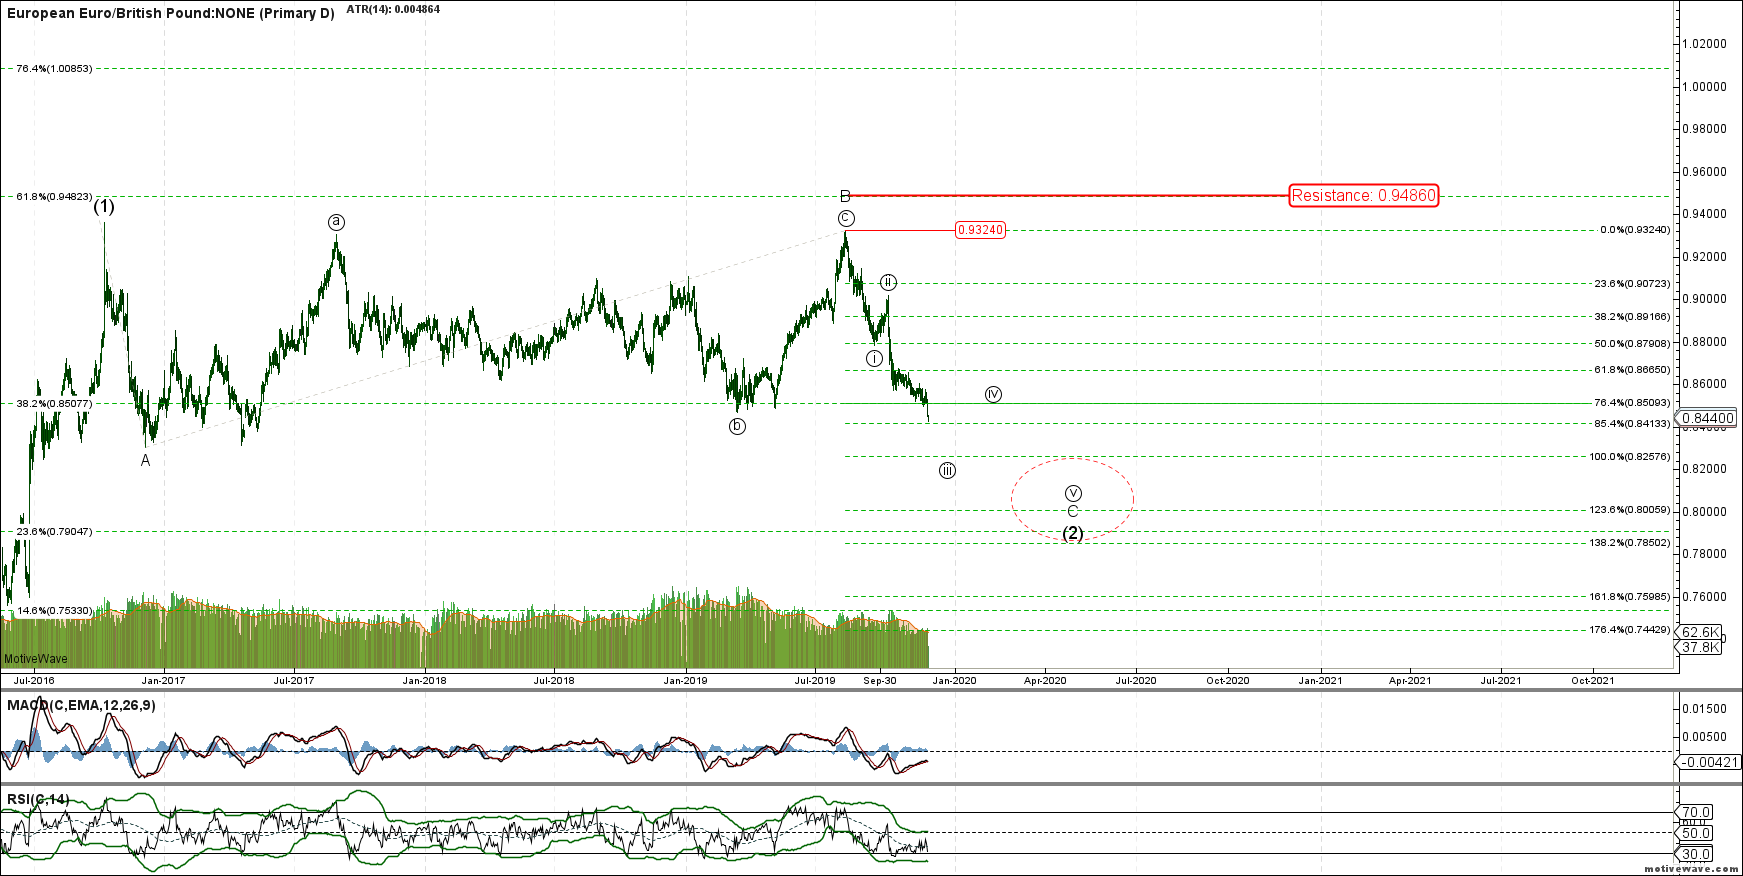 BaseCase - EURGBP= - Primary D - Dec-05 1244 PM (1 day)